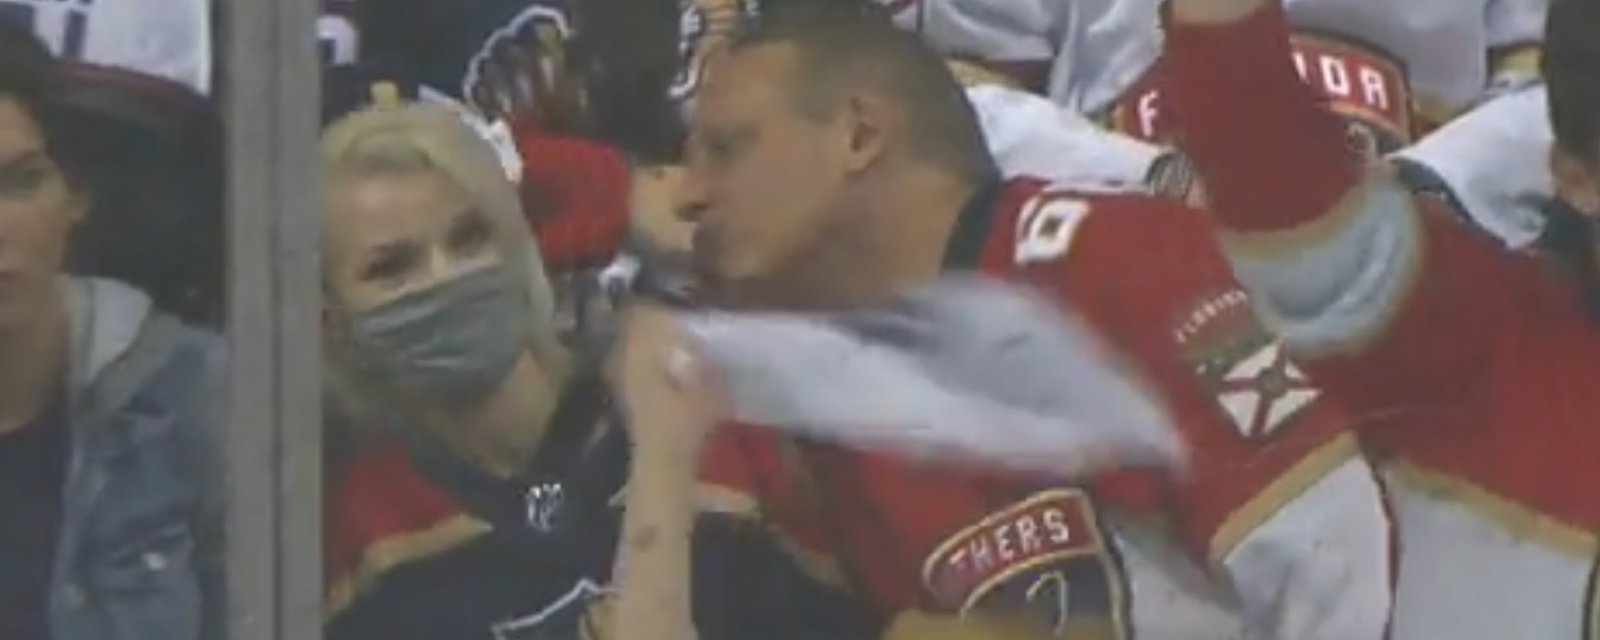 Panthers fan leans in for a kiss but gets completely shutdown as the cameras roll.